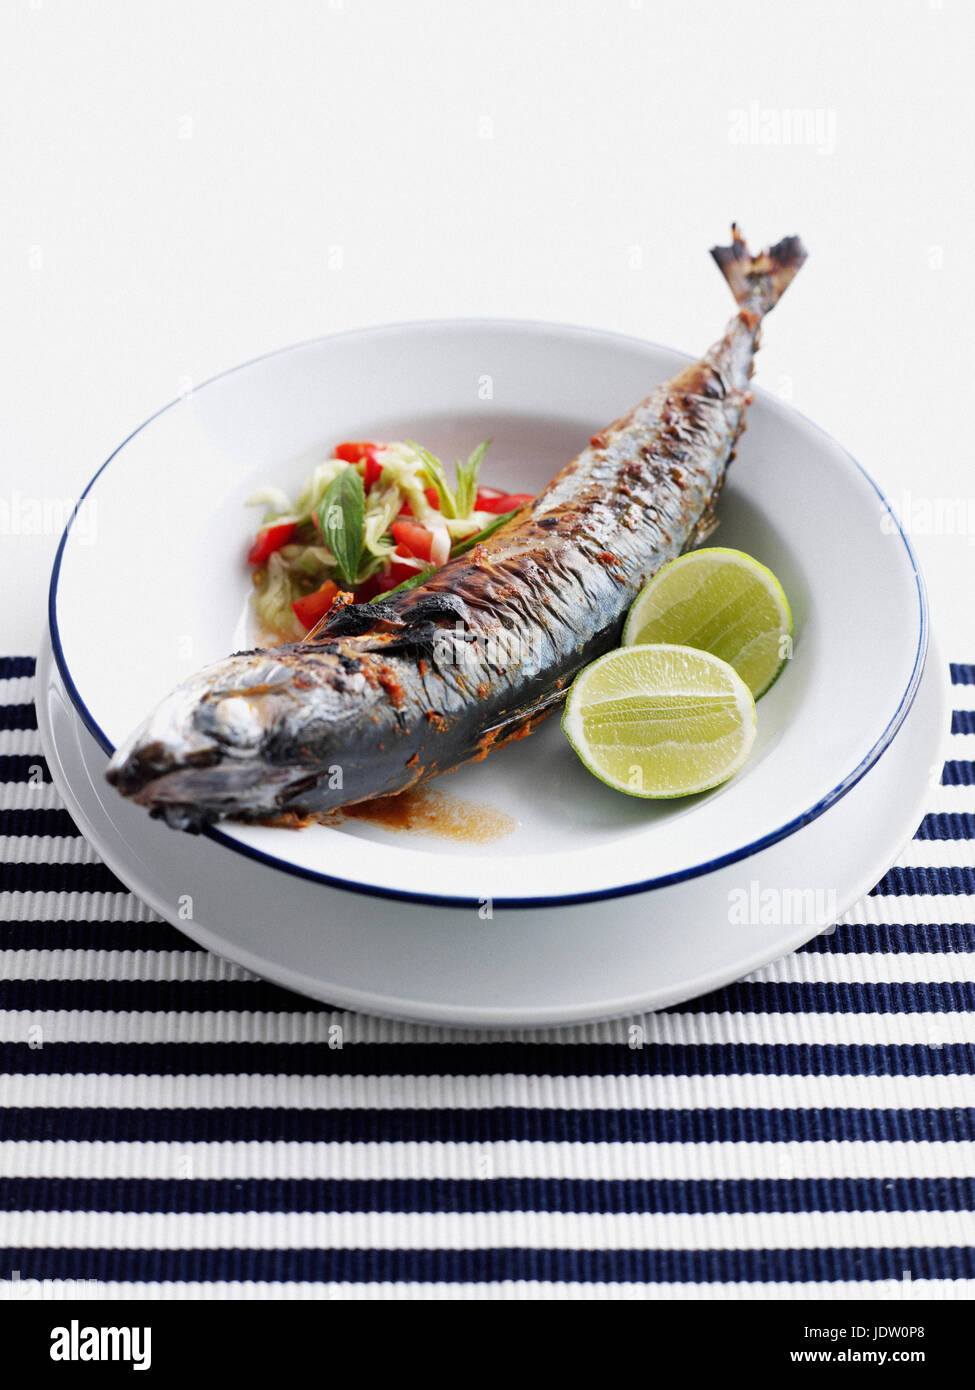 Plate of grilled fish with salad Stock Photo